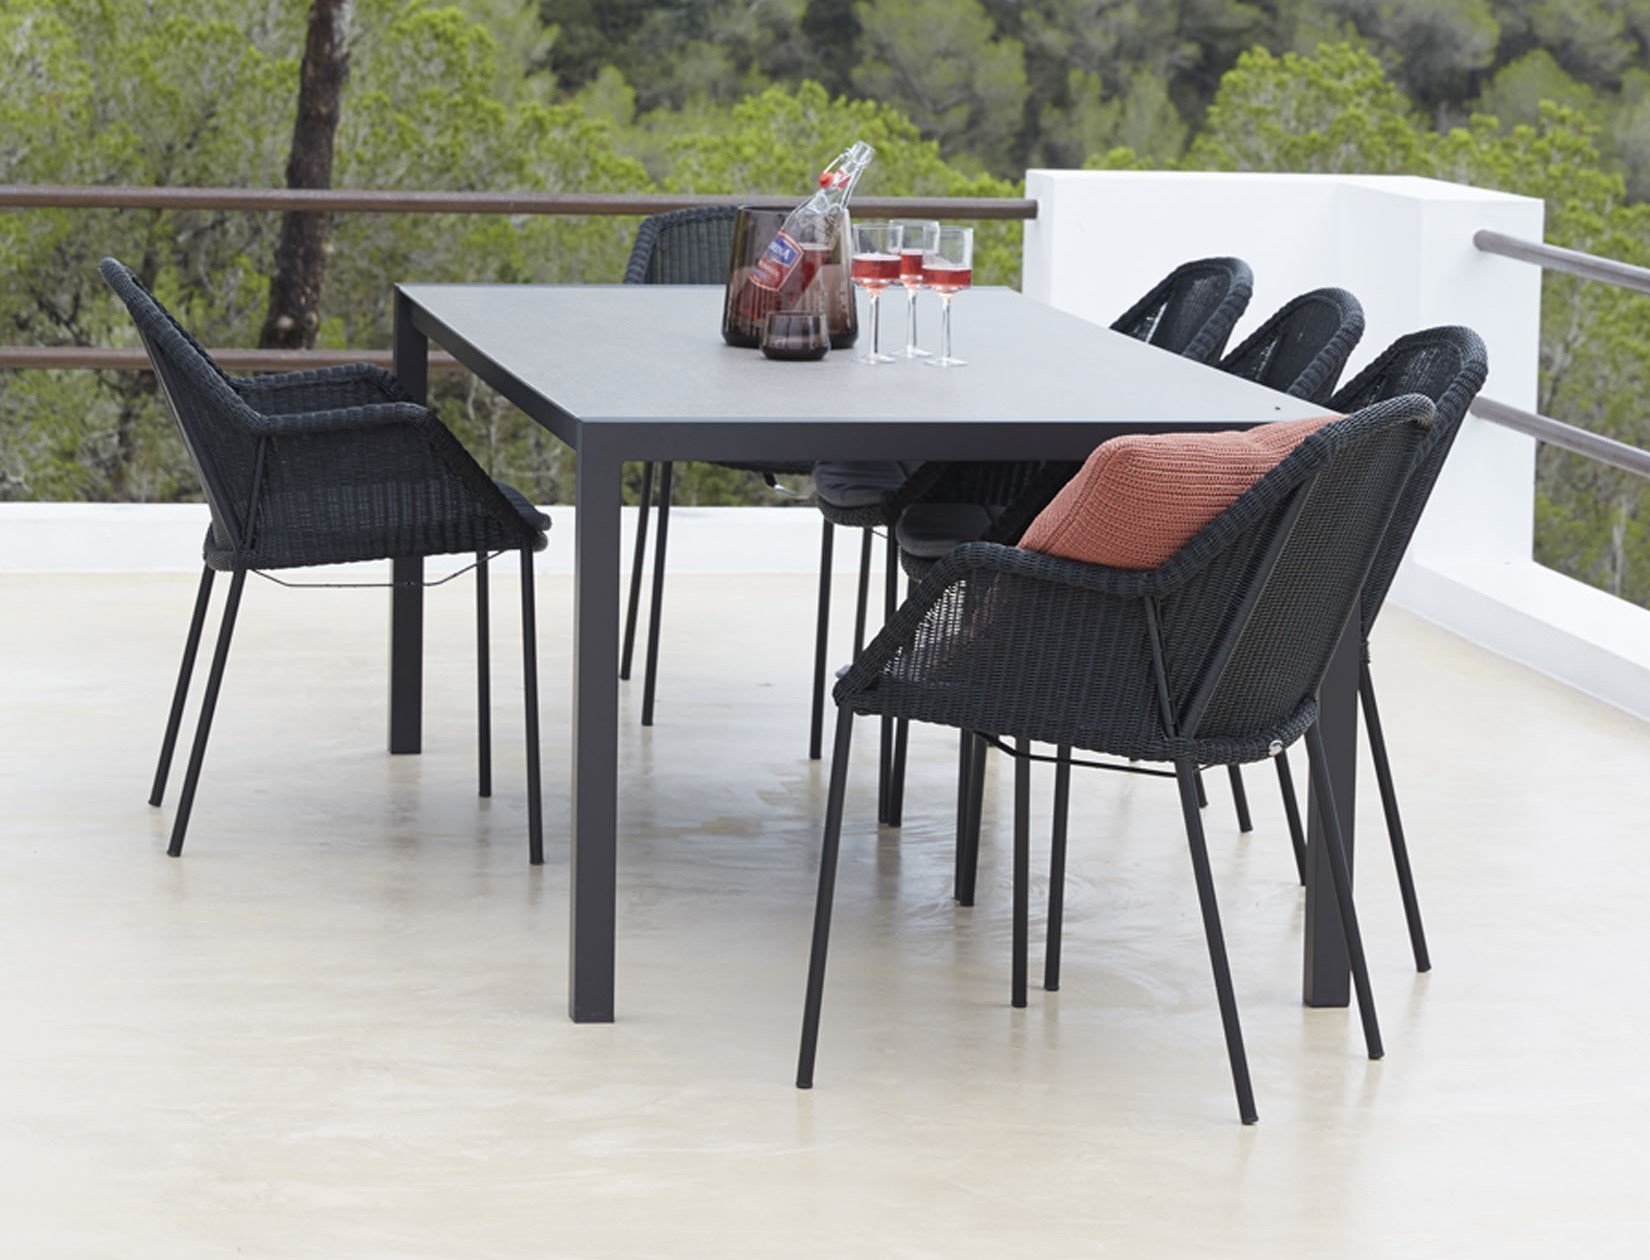 Breeze Dining Chair from Cane-line, designed by Strand+Hvass